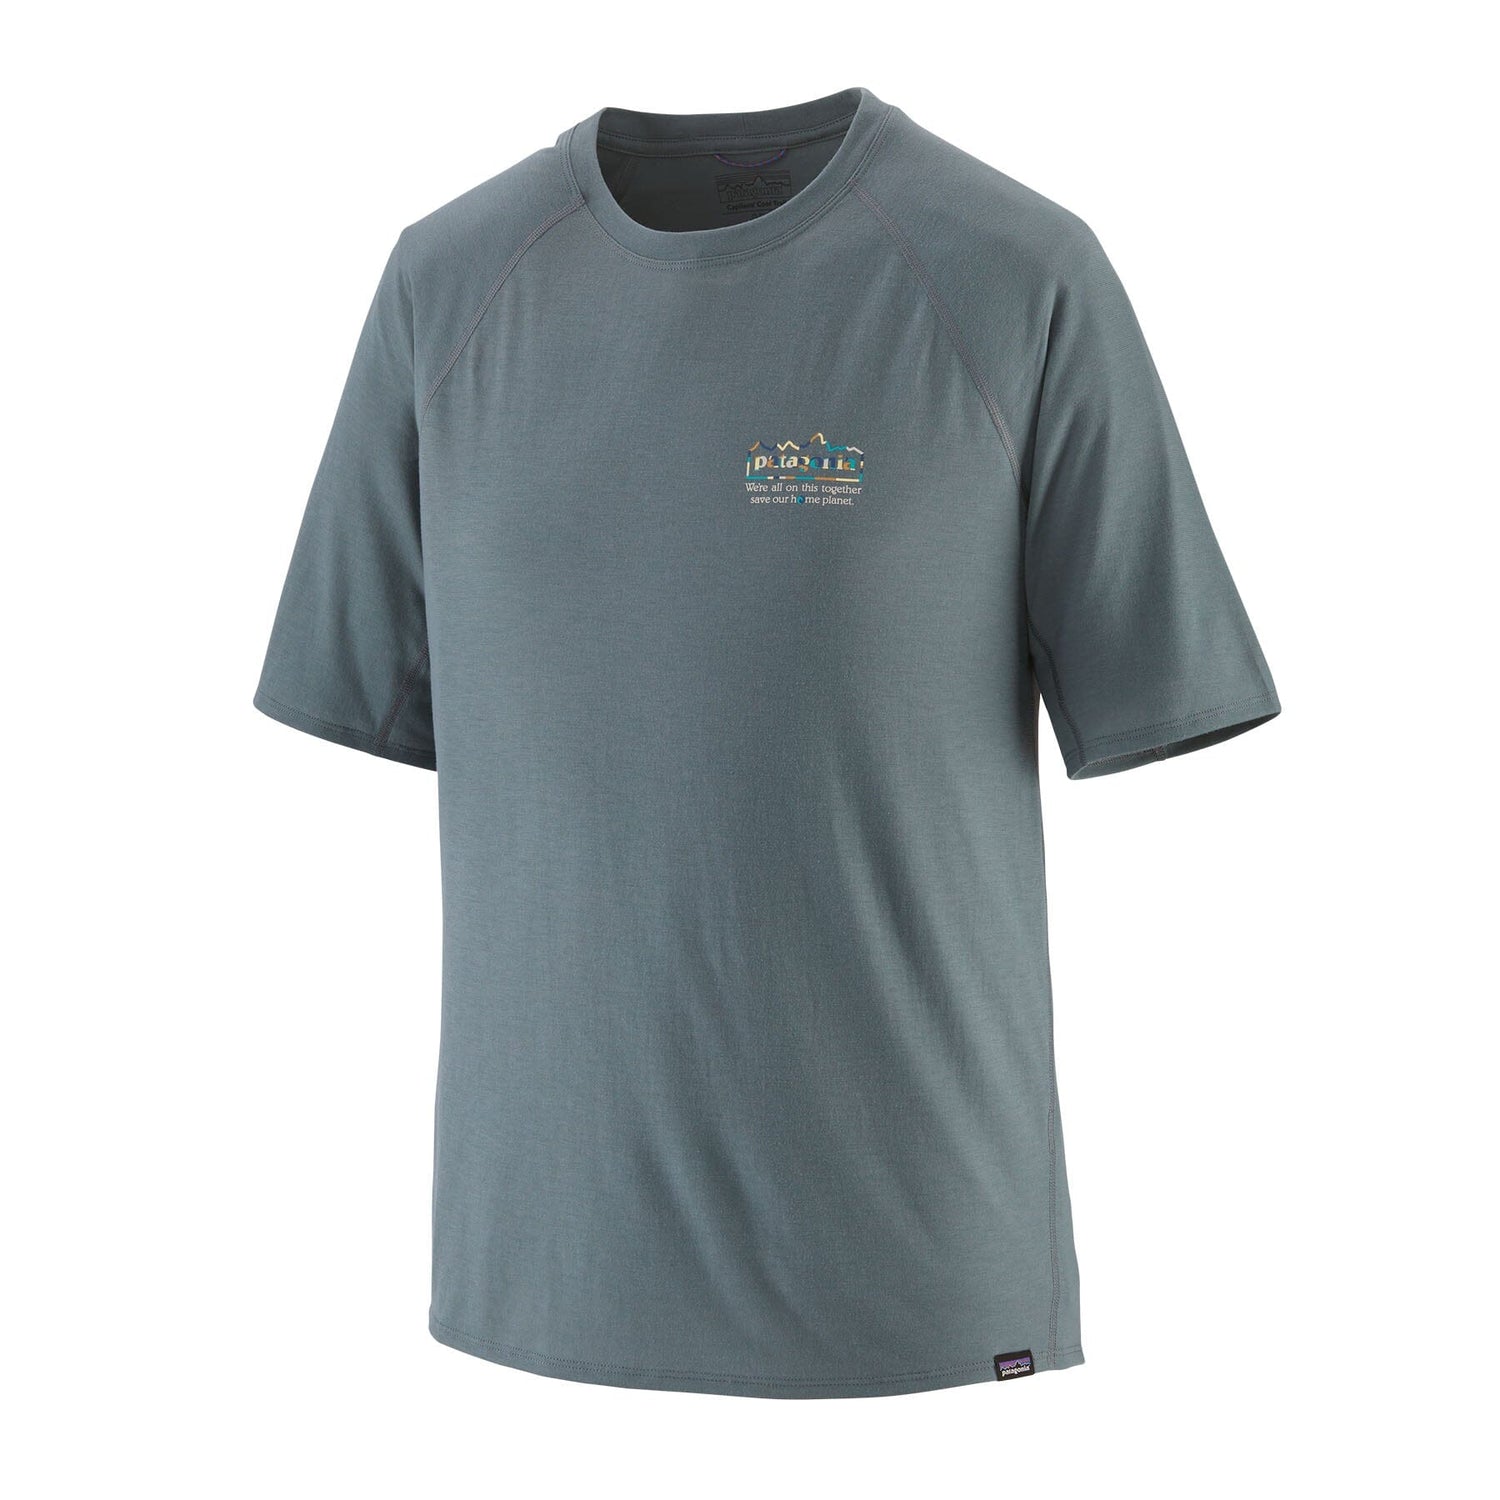 Patagonia - M's Cap Cool Trail Graphic Shirt - Recycled polyester & Naia® Renew - Weekendbee - sustainable sportswear